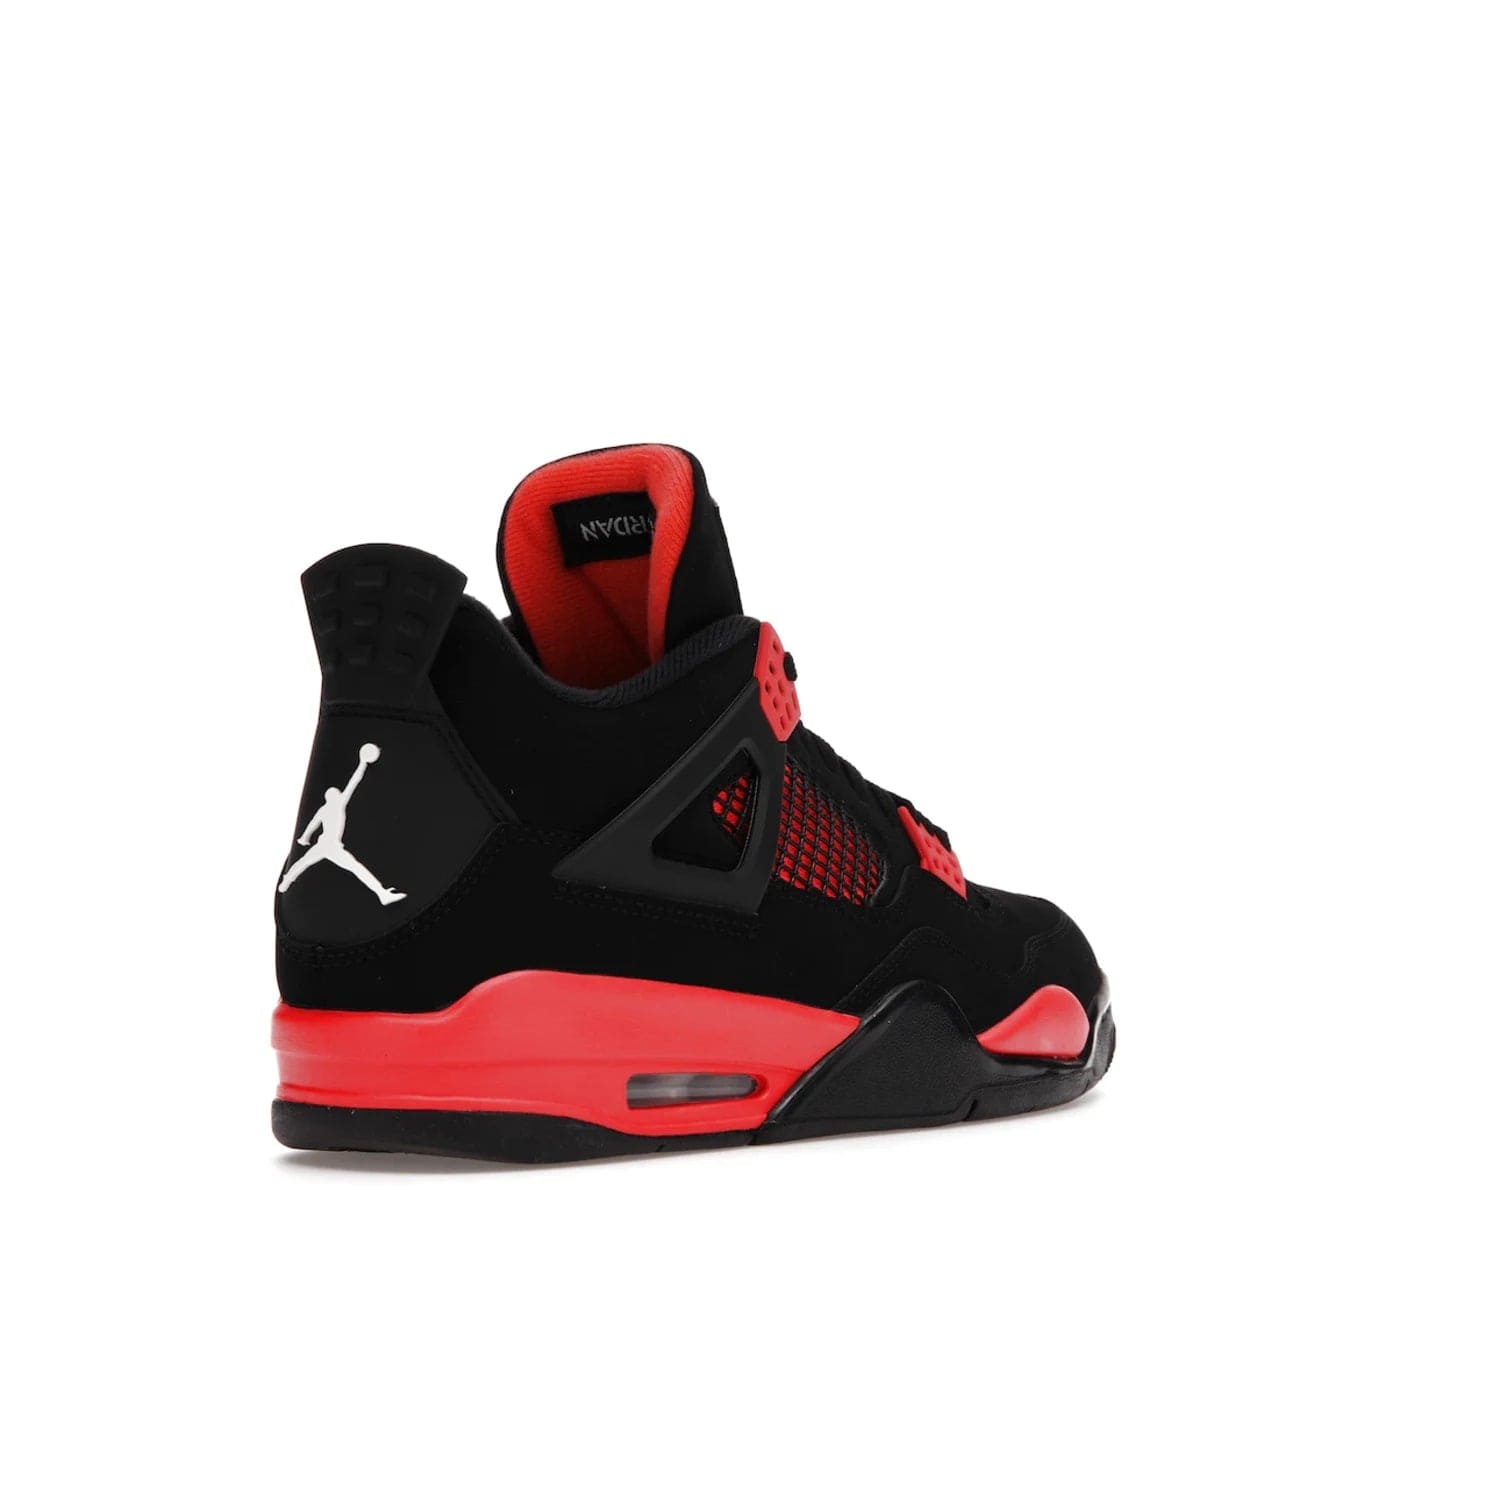 Jordan 4 Retro Red Thunder - Image 32 - Only at www.BallersClubKickz.com - Upscale your footwear with the Air Jordan 4 Retro Red Thunder. Featuring a Durabuck upper, red underlays, signature Flight patch, and vibrant red midsole, this retro sneaker adds style and edge. Releases in January 2022.